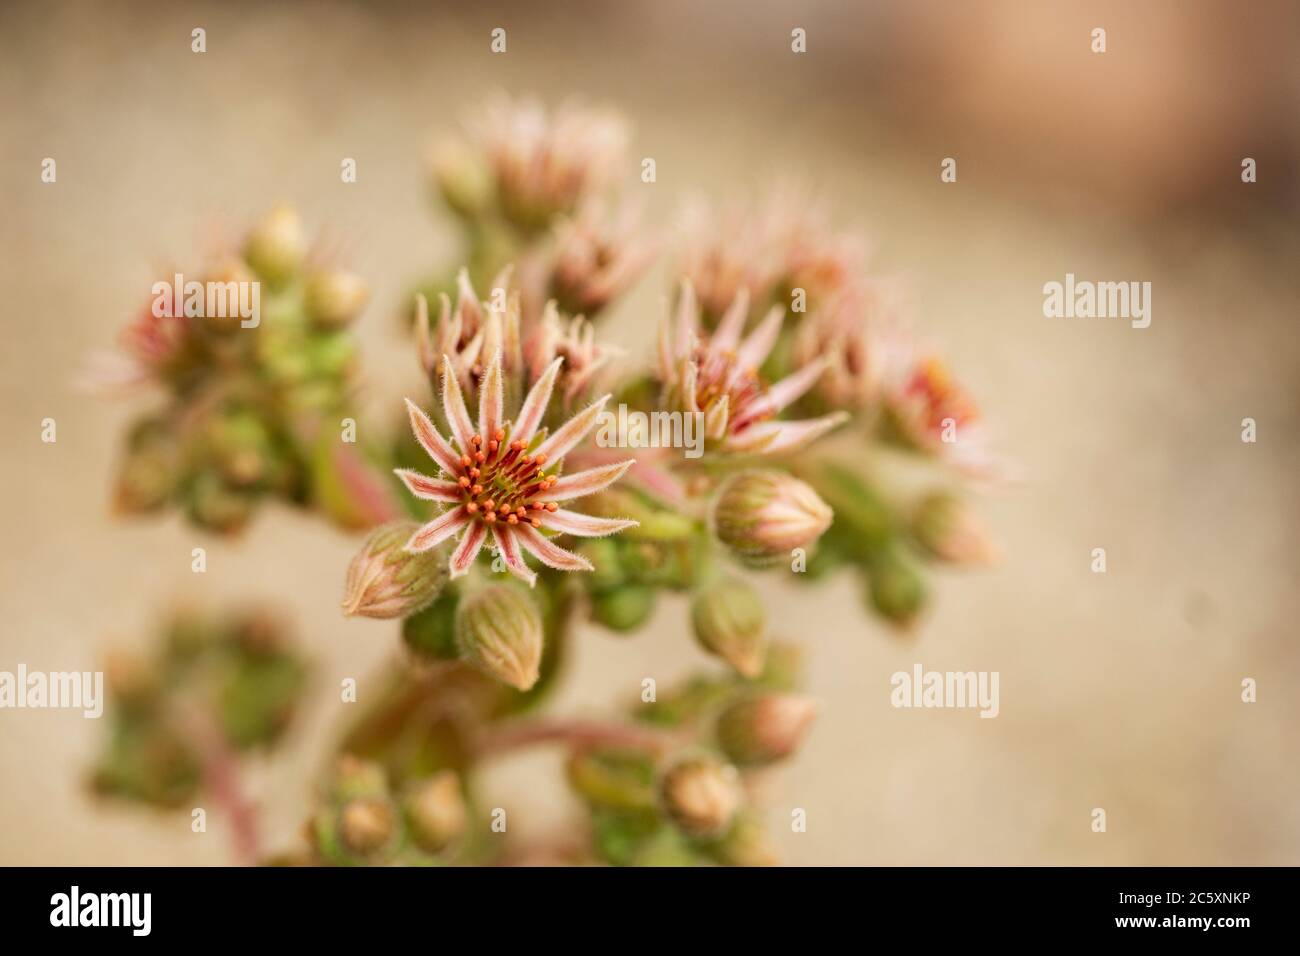 A sempervivum, or houseleek, beginning to flower. A succulent in family Crassulaceae, the plant is beginning to die when flowers appear. Stock Photo